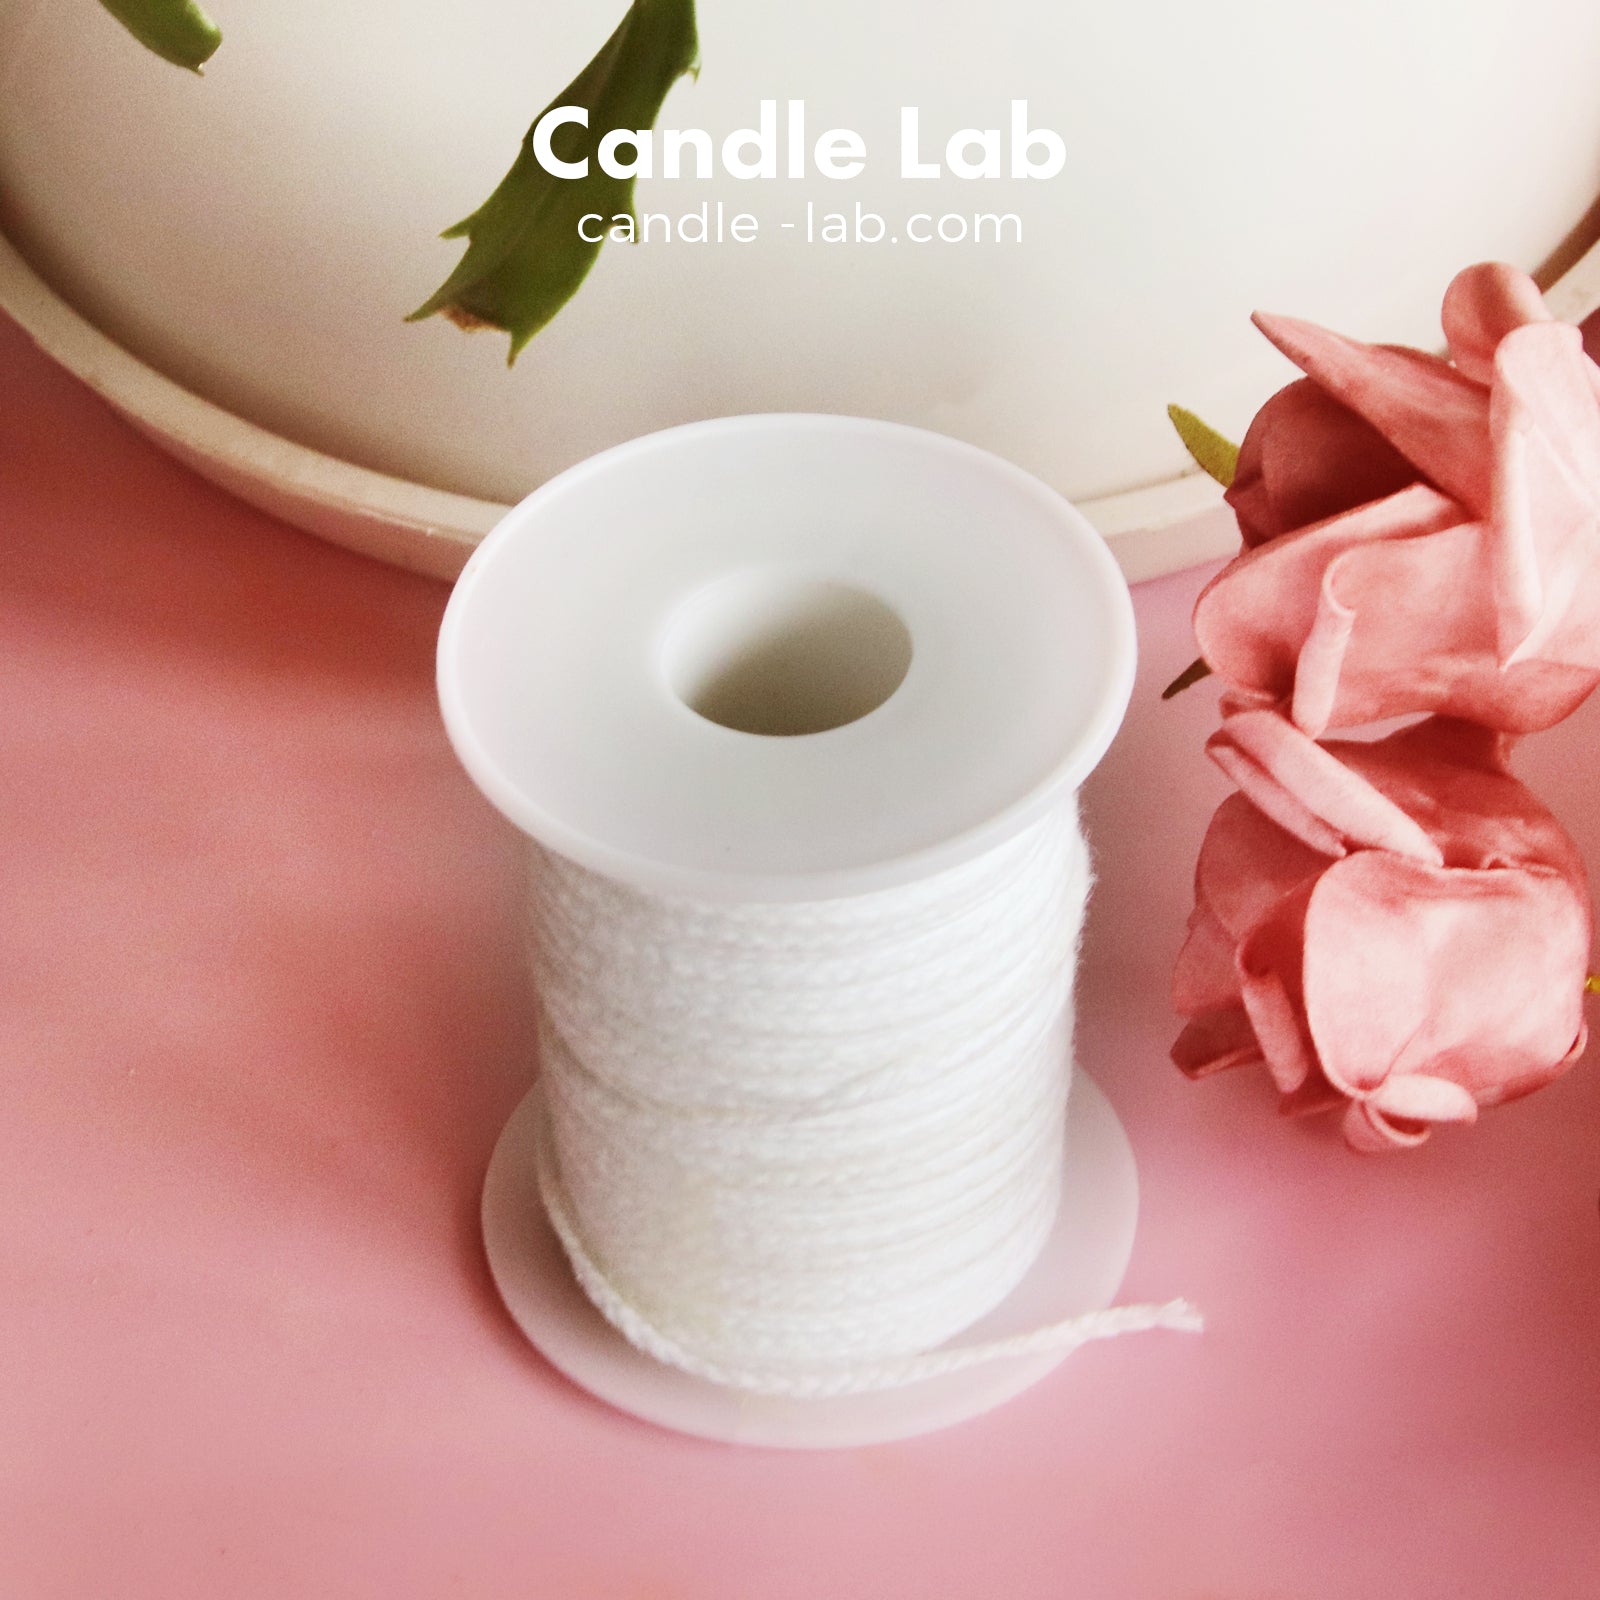 Cotton Candle Wick Wix Spool 200 ft Braided Candle Thread Wick Roll 35 Ply  Woven Candle Wicks for Candle Making in Max Dia 3.5 Inch Pillar, Candle Wick  Only (No Metal Tabs) 35 Ply Wicks